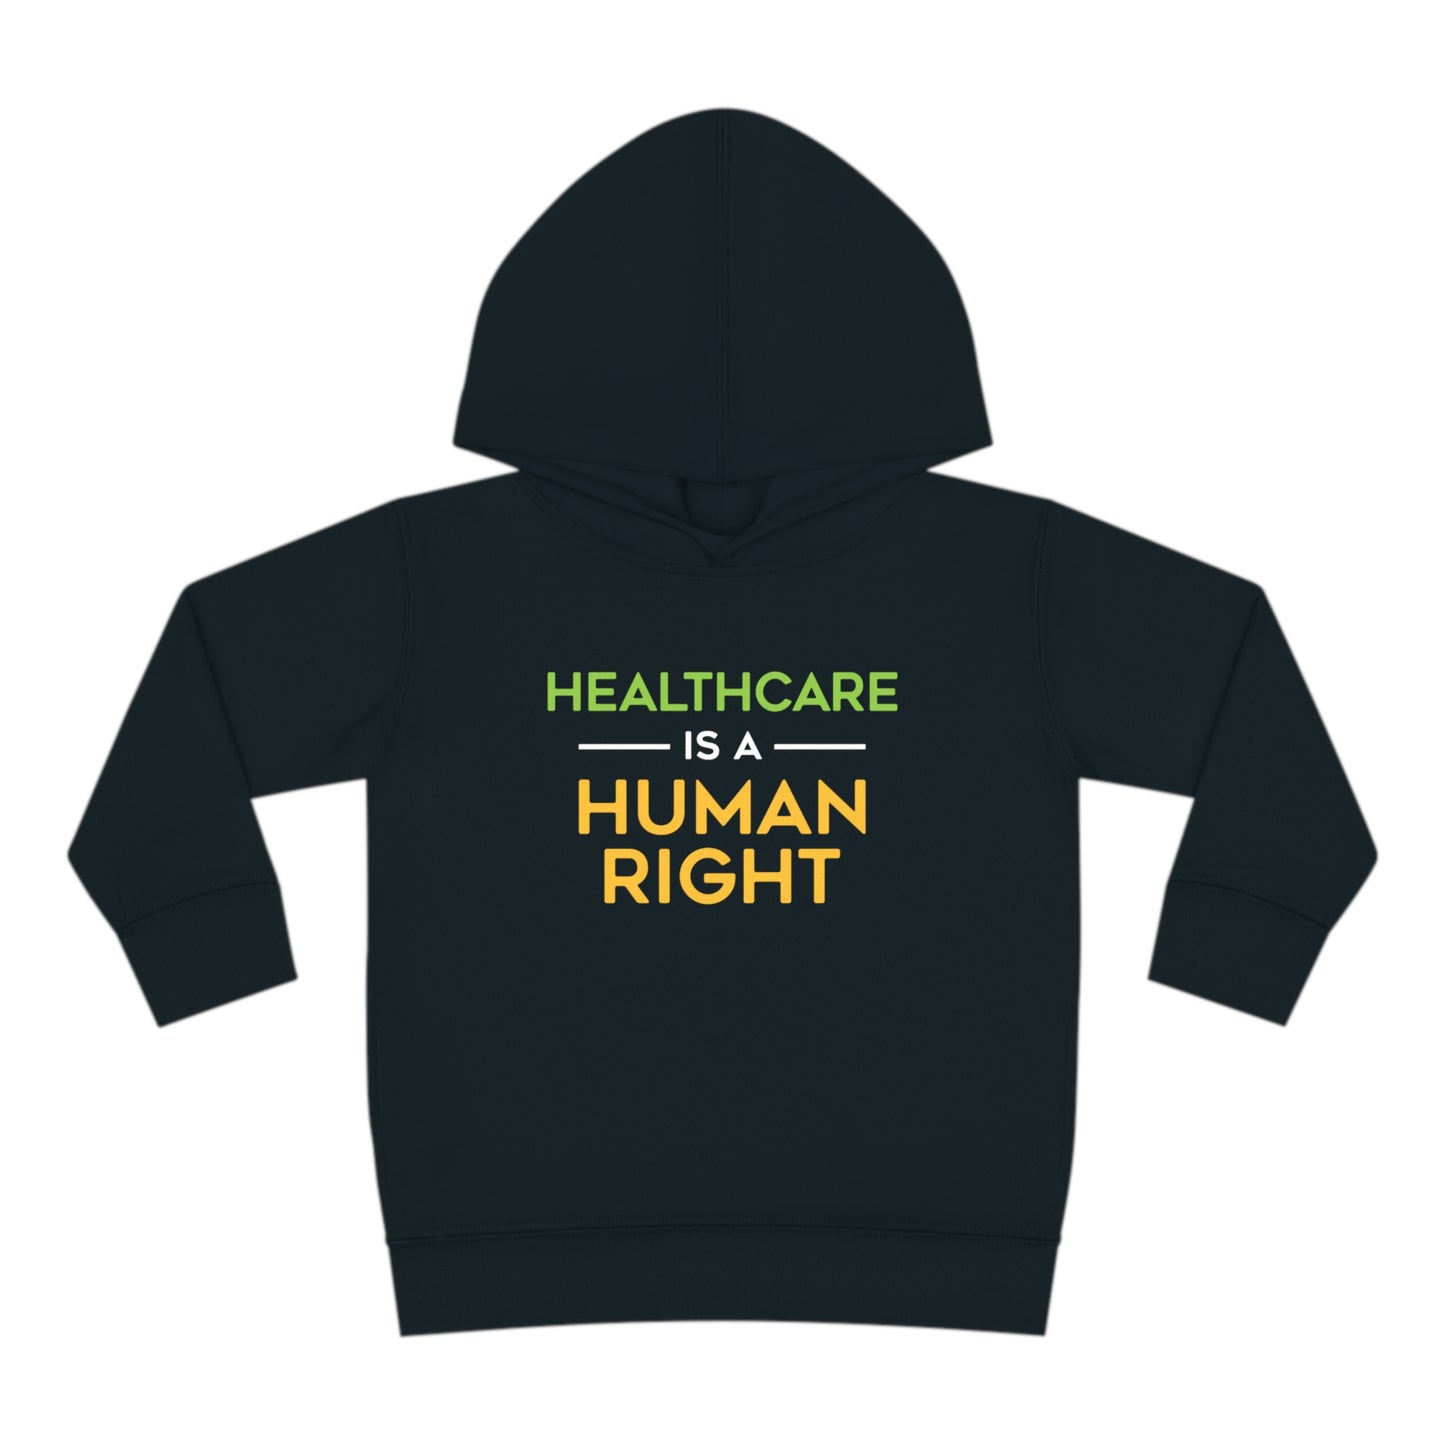 “Healthcare Is A Human Right” Toddler Hoodie